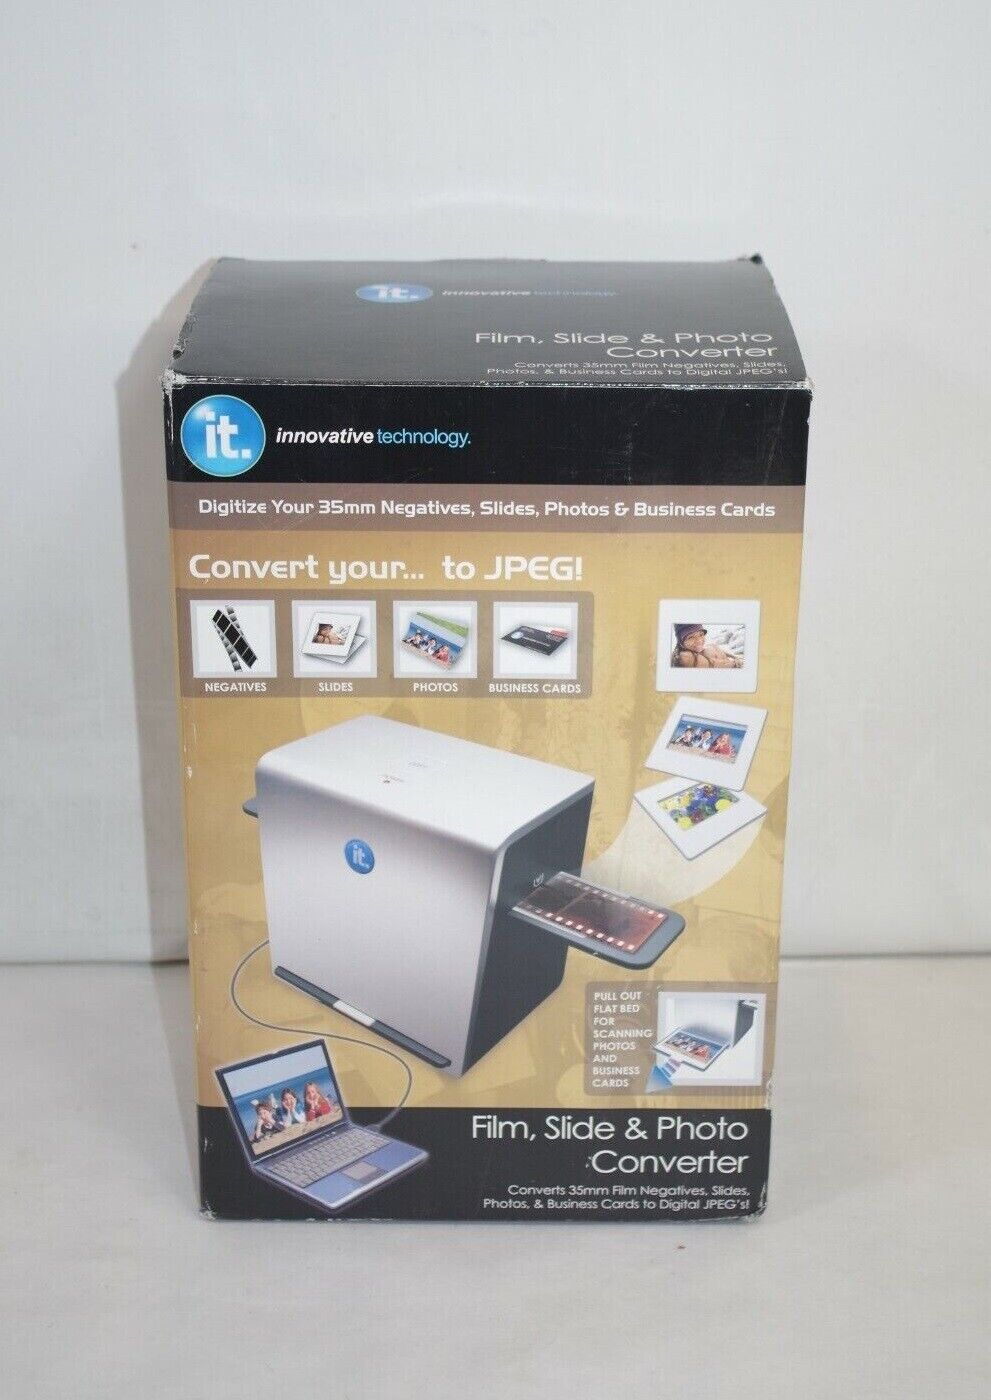 ITNS-500 Innovative Technology Photos and Negatives (35mm) JPEG Converter for PC